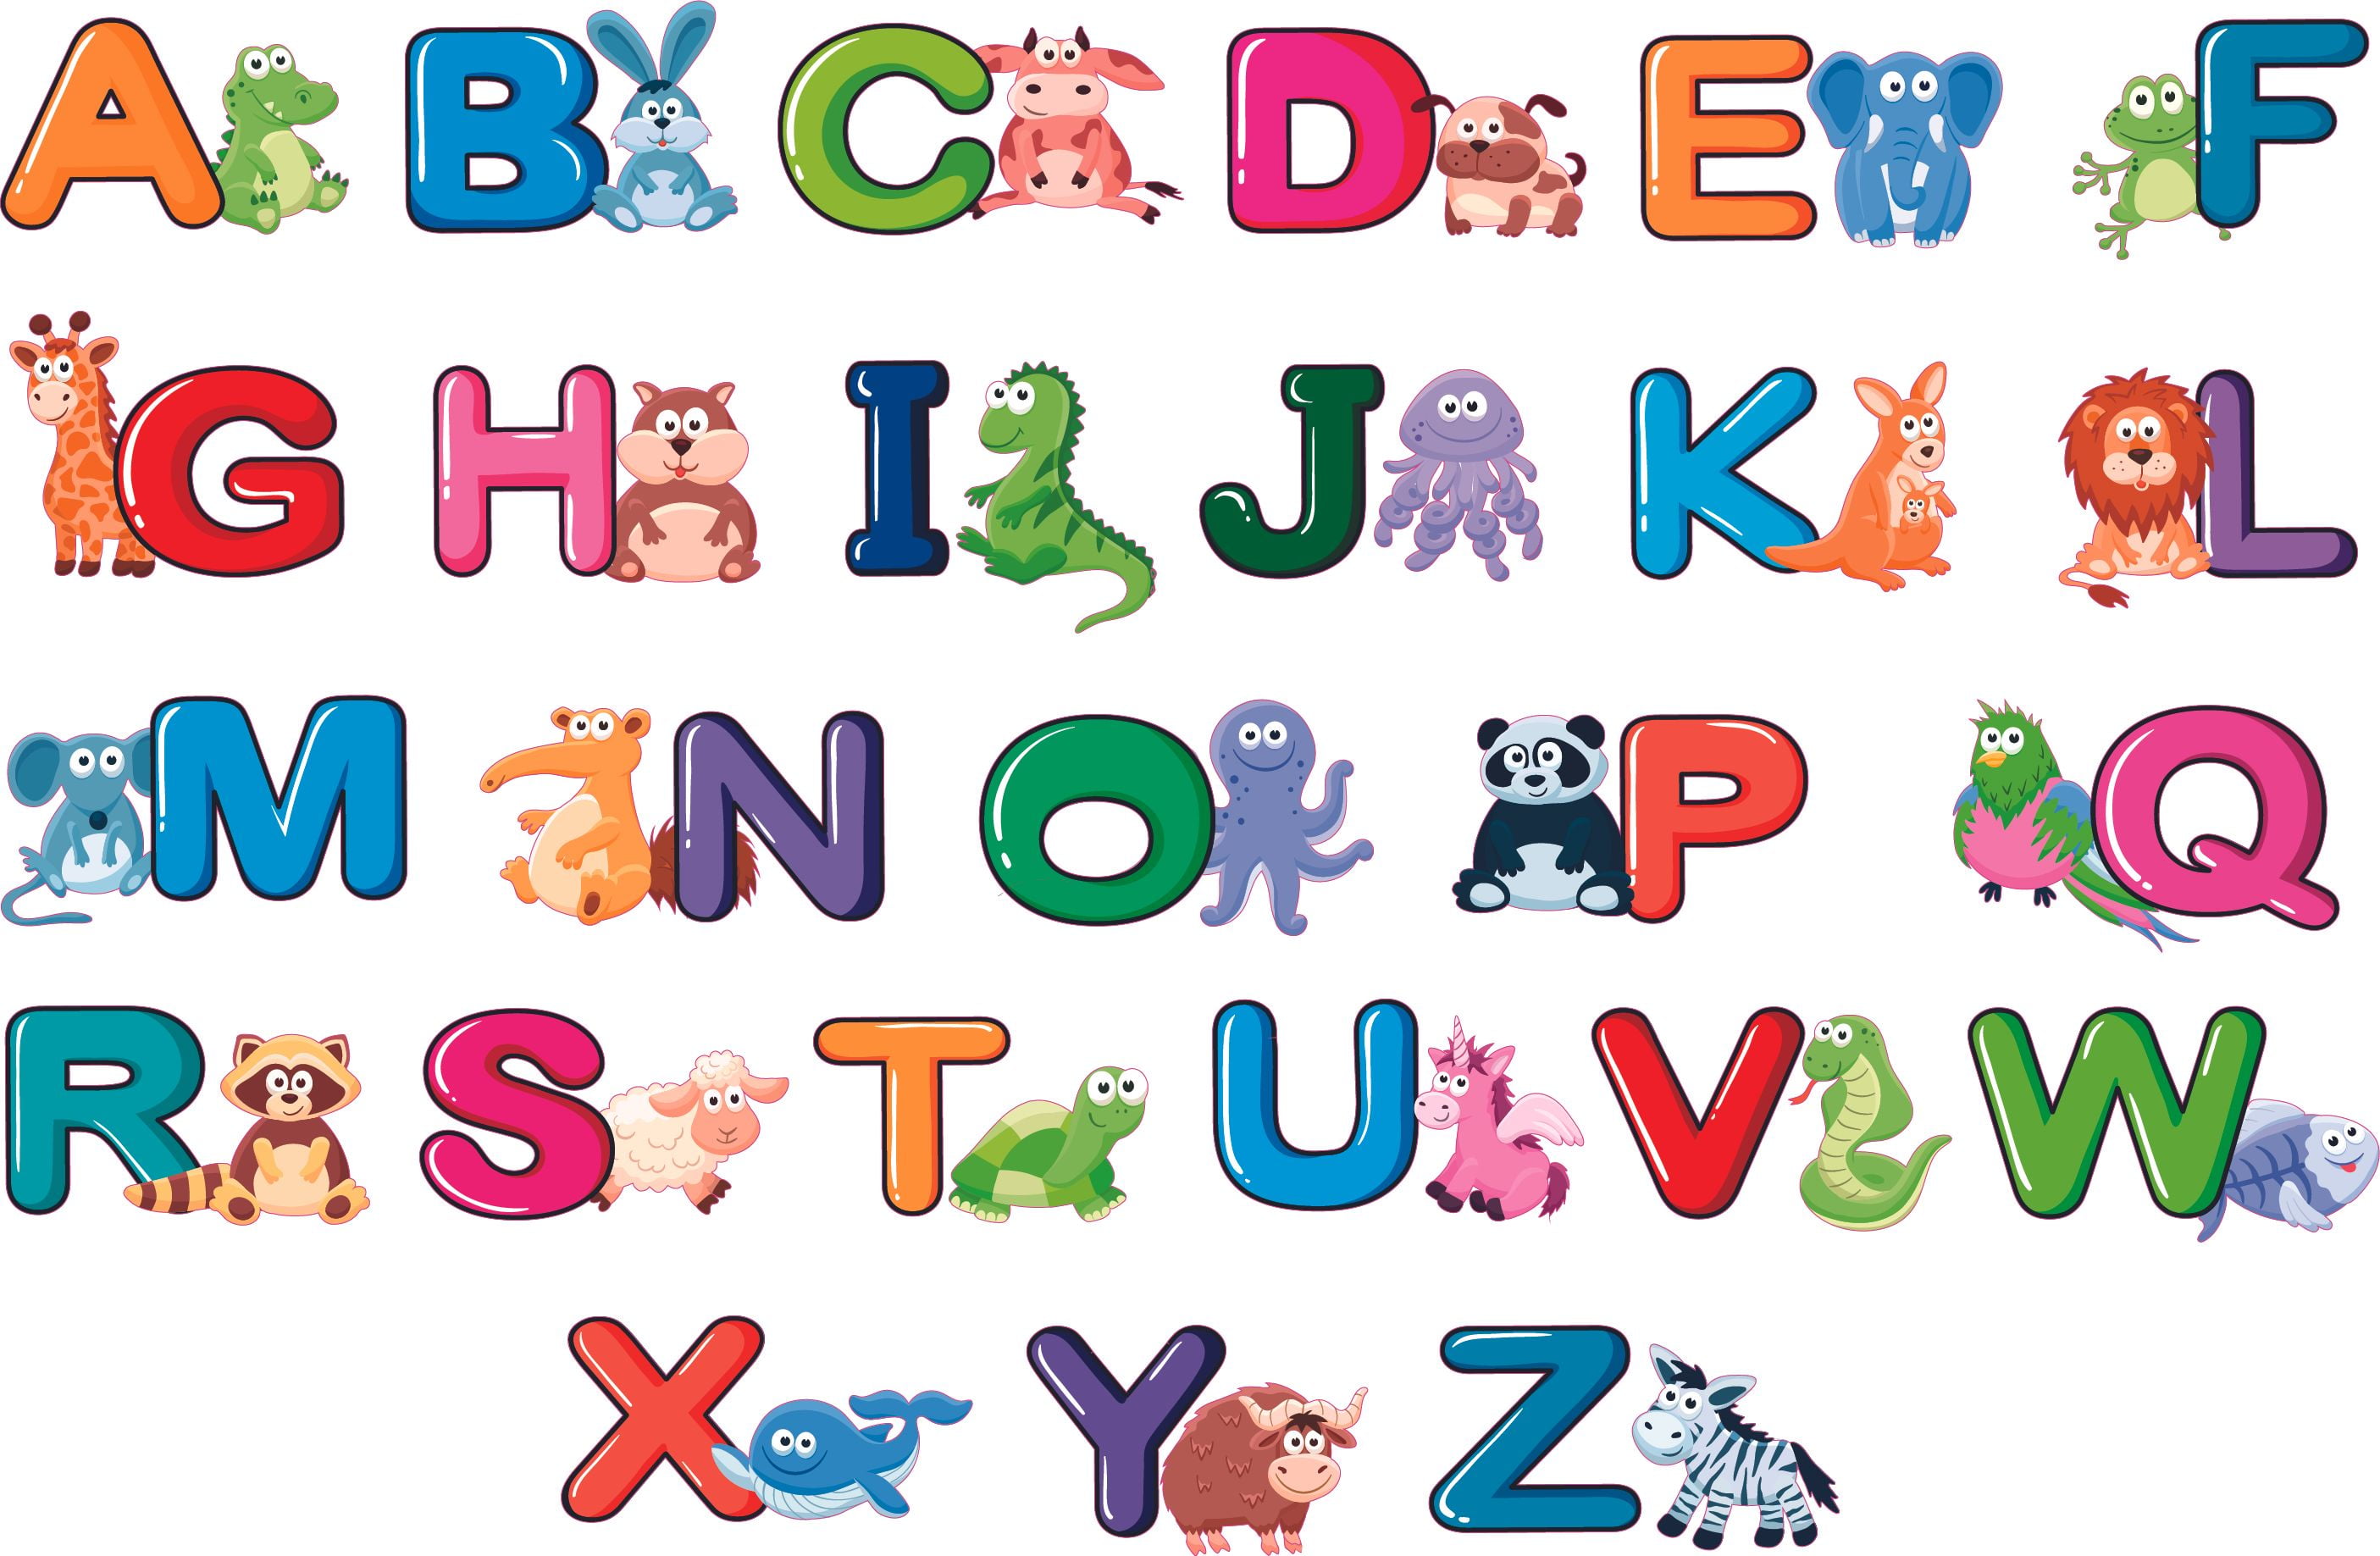 Alphabet and Shapes Gel Clings Classroom Educational Fun for Home Flexible Reusable Glass Window Clings for Kids and Toddlers Square with Silly Faces ABC Letters Octagon Airplane Nursery